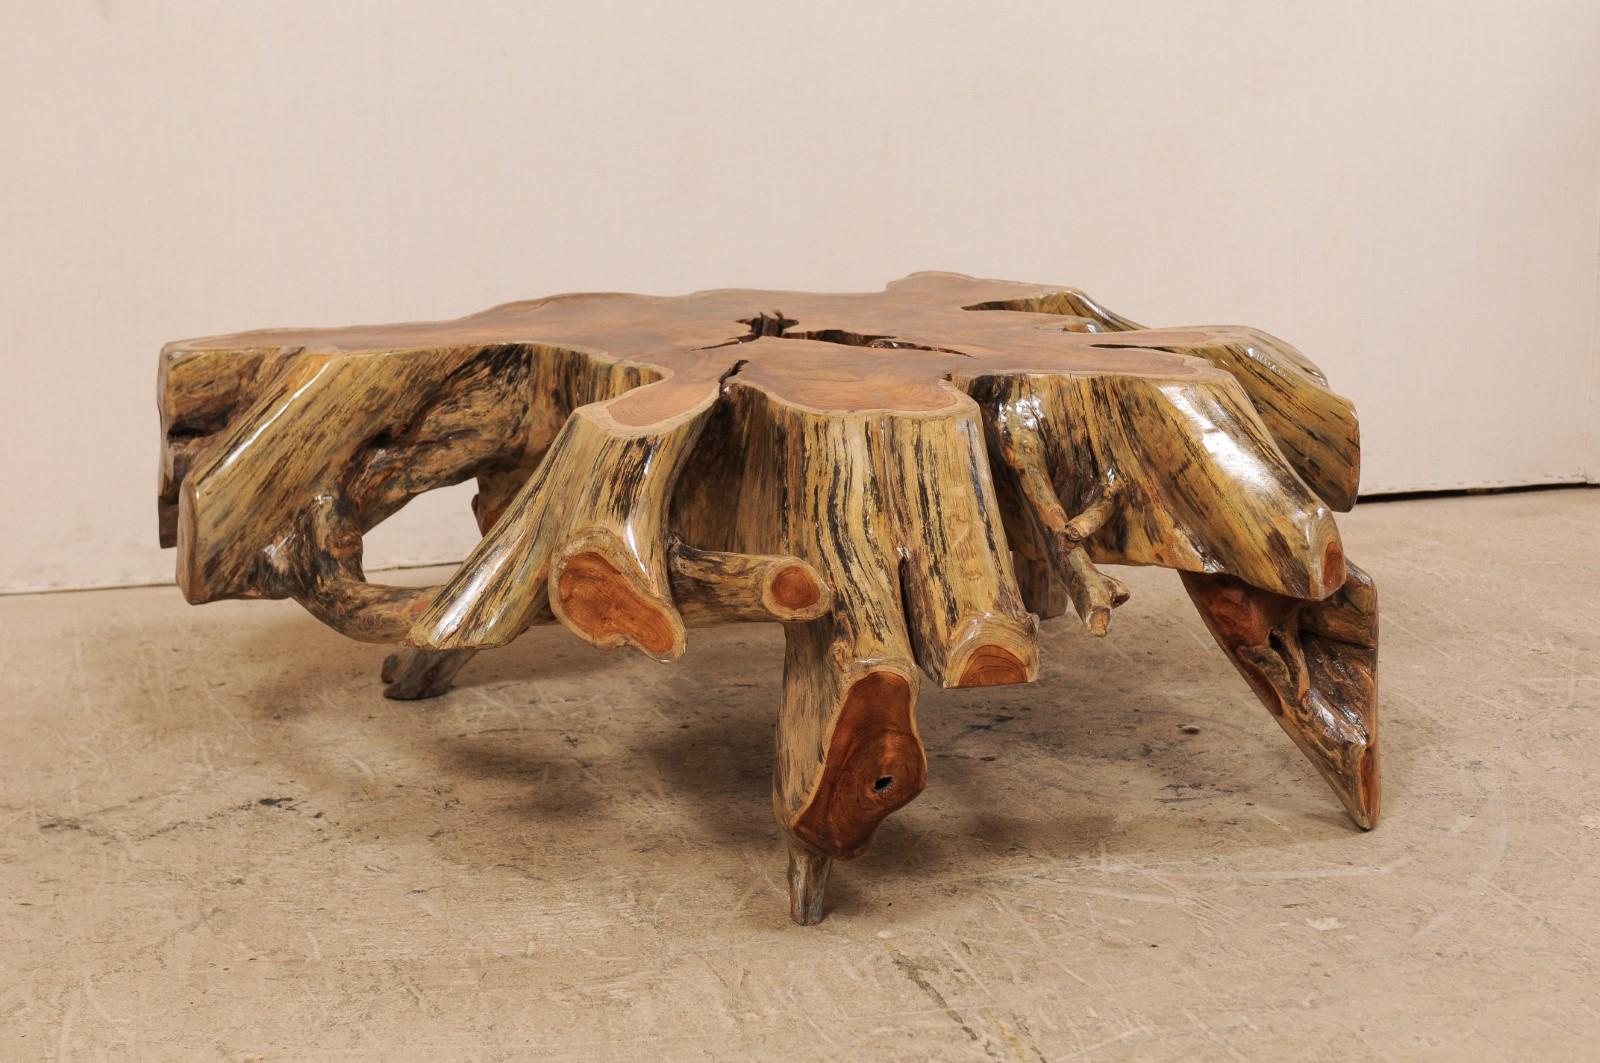 A European wooden tree root coffee table. This natural wood coffee table has been fashioned with the use of a 19th century European tree root/stump, with intertwining roots which gives it an organic and airy feel. There is a nice contrast of colors